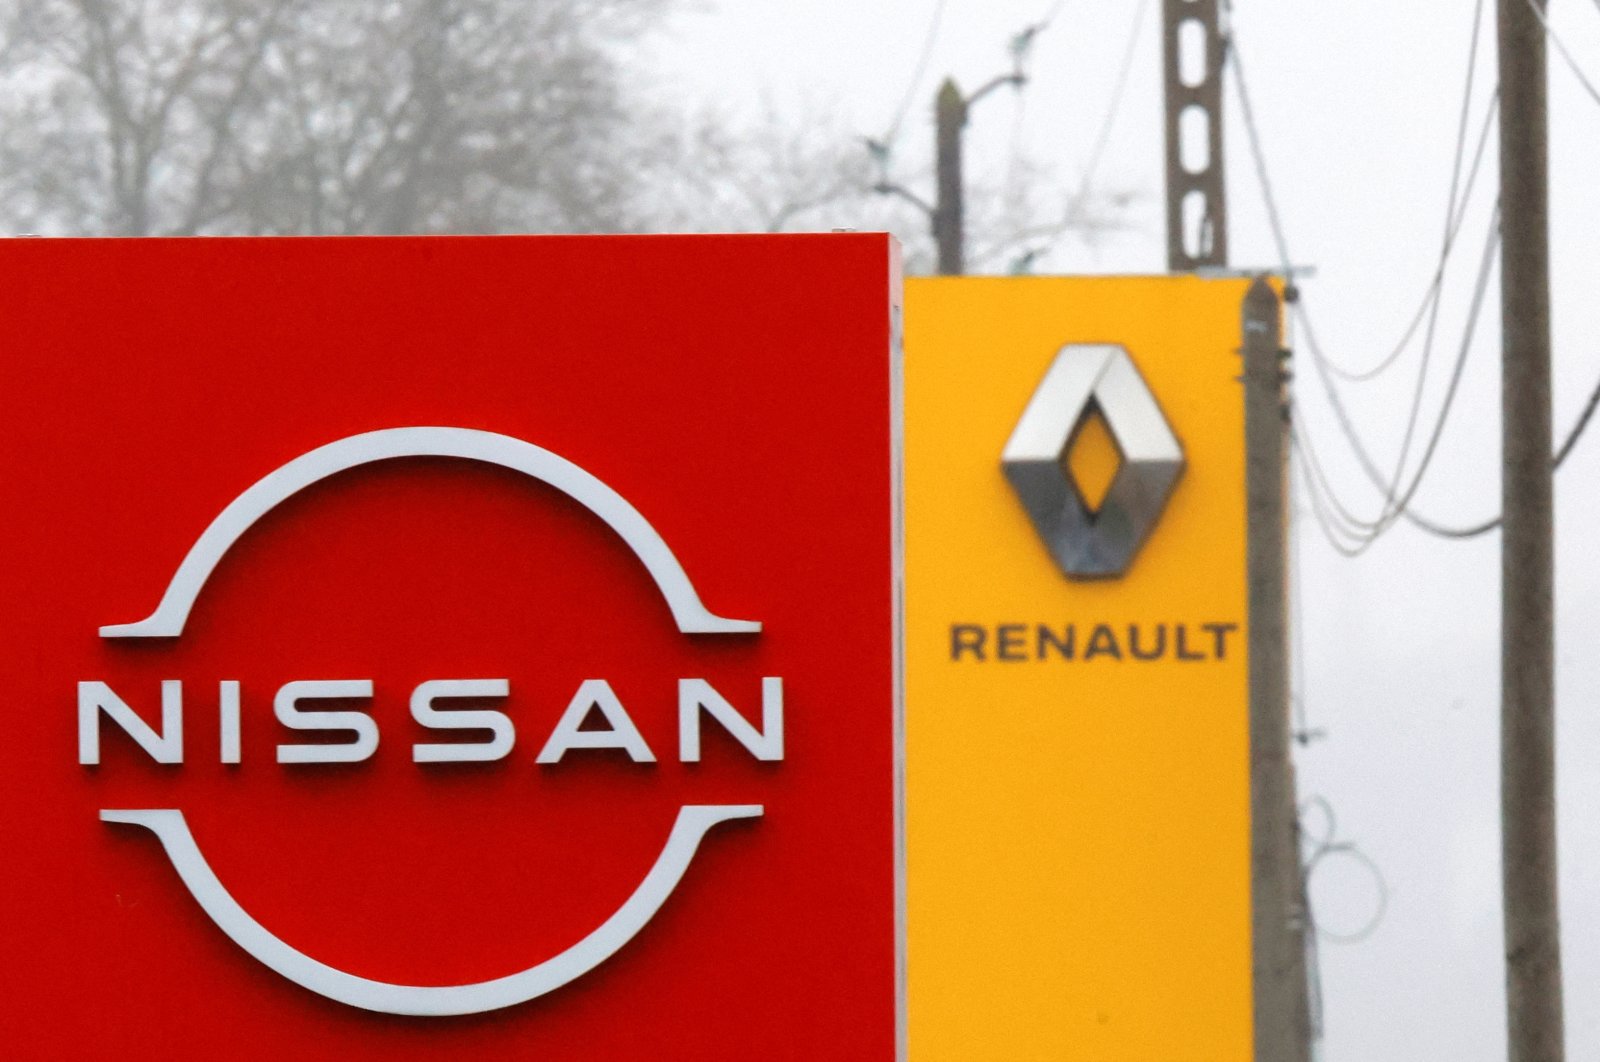 The logos of car manufacturers Nissan and Renault are seen in front of dealerships of the companies in Etampes, near Paris, France, Jan. 26, 2023. (Reuters Photo)